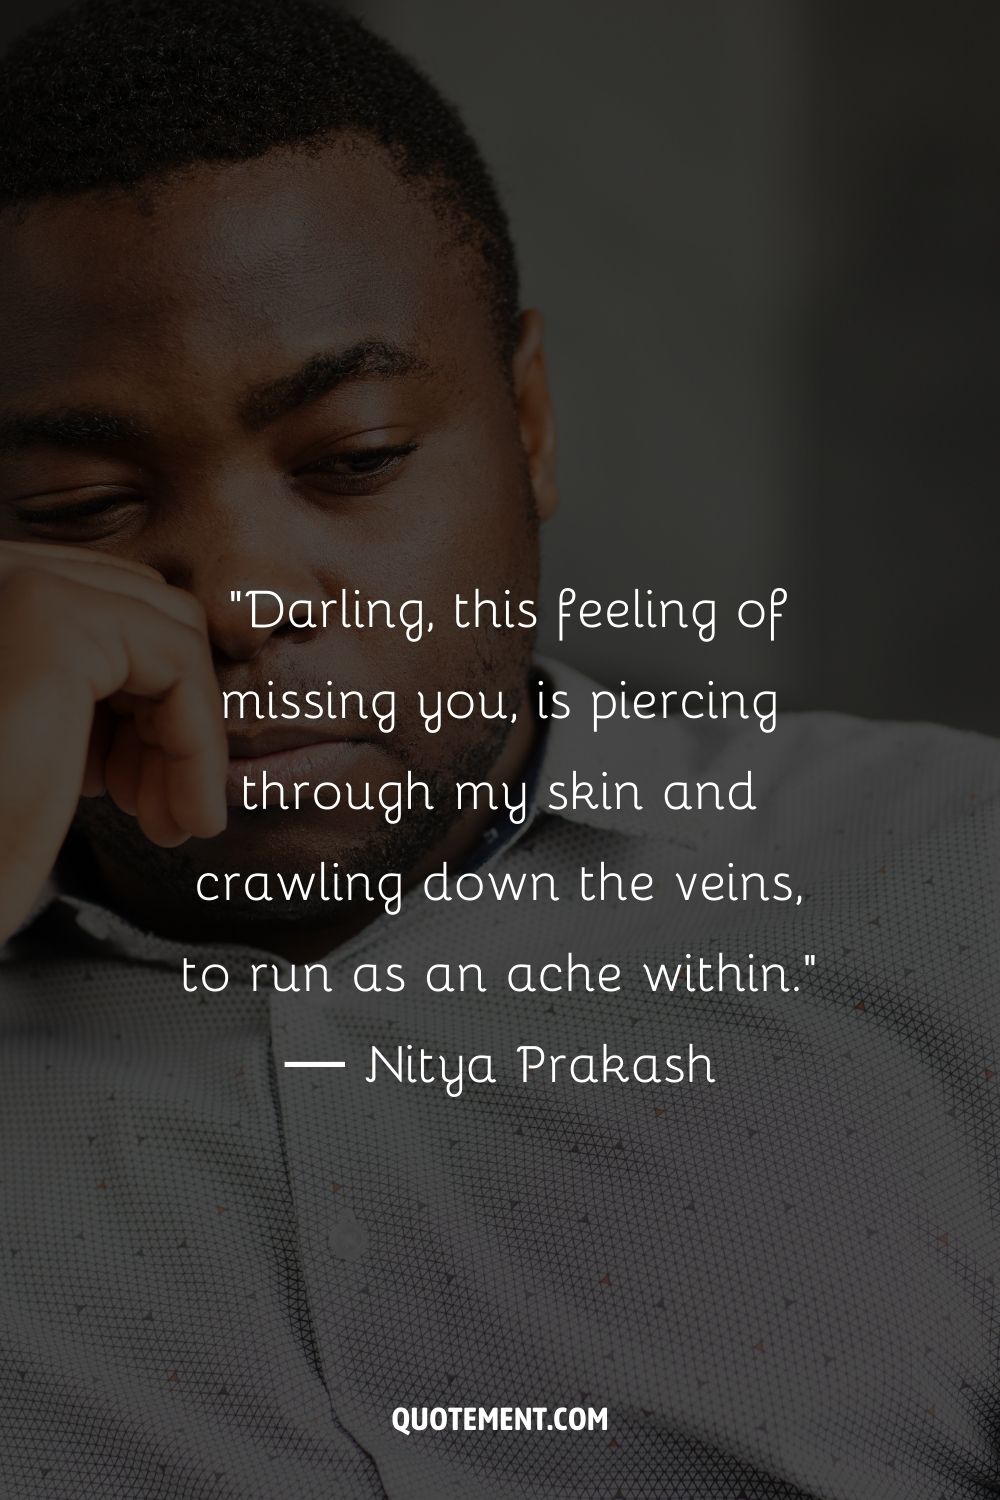 Darling, this feeling of missing you, is piercing through my skin and crawling down the veins, to run as an ache within